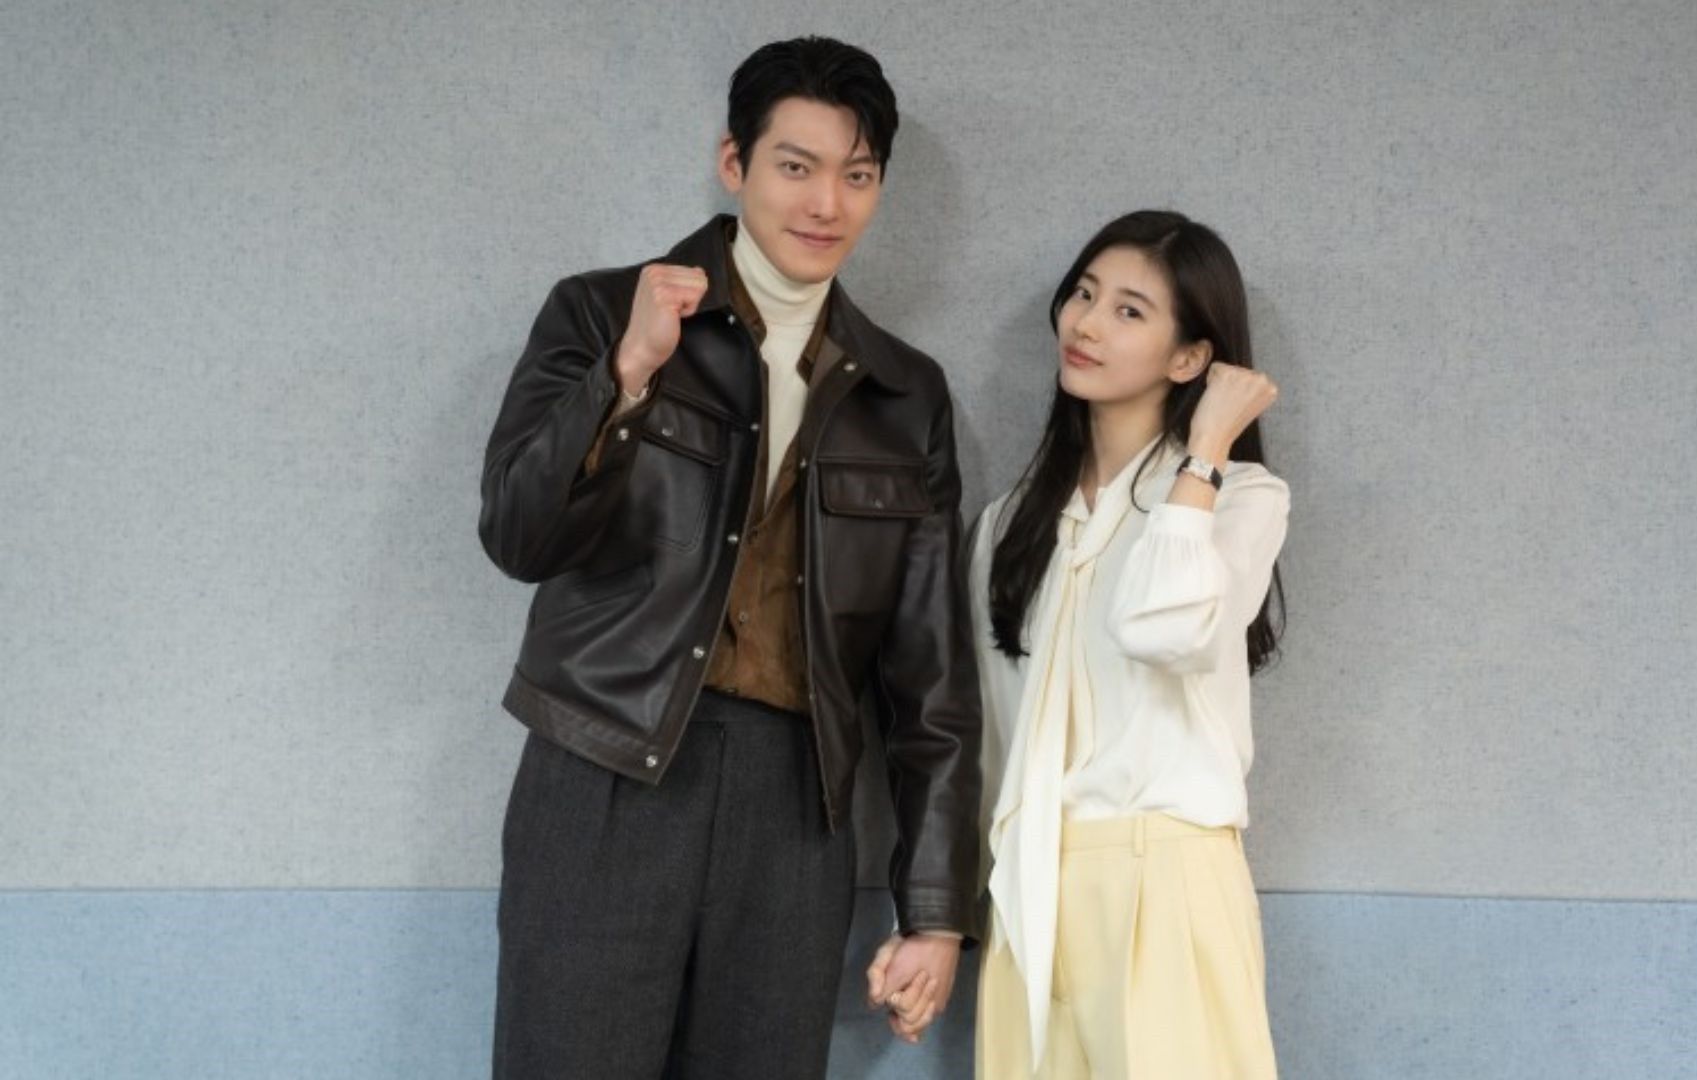 Kim Woo Bin, Bae Suzy reuniting after 8 years for new show by 'The Glory' writer